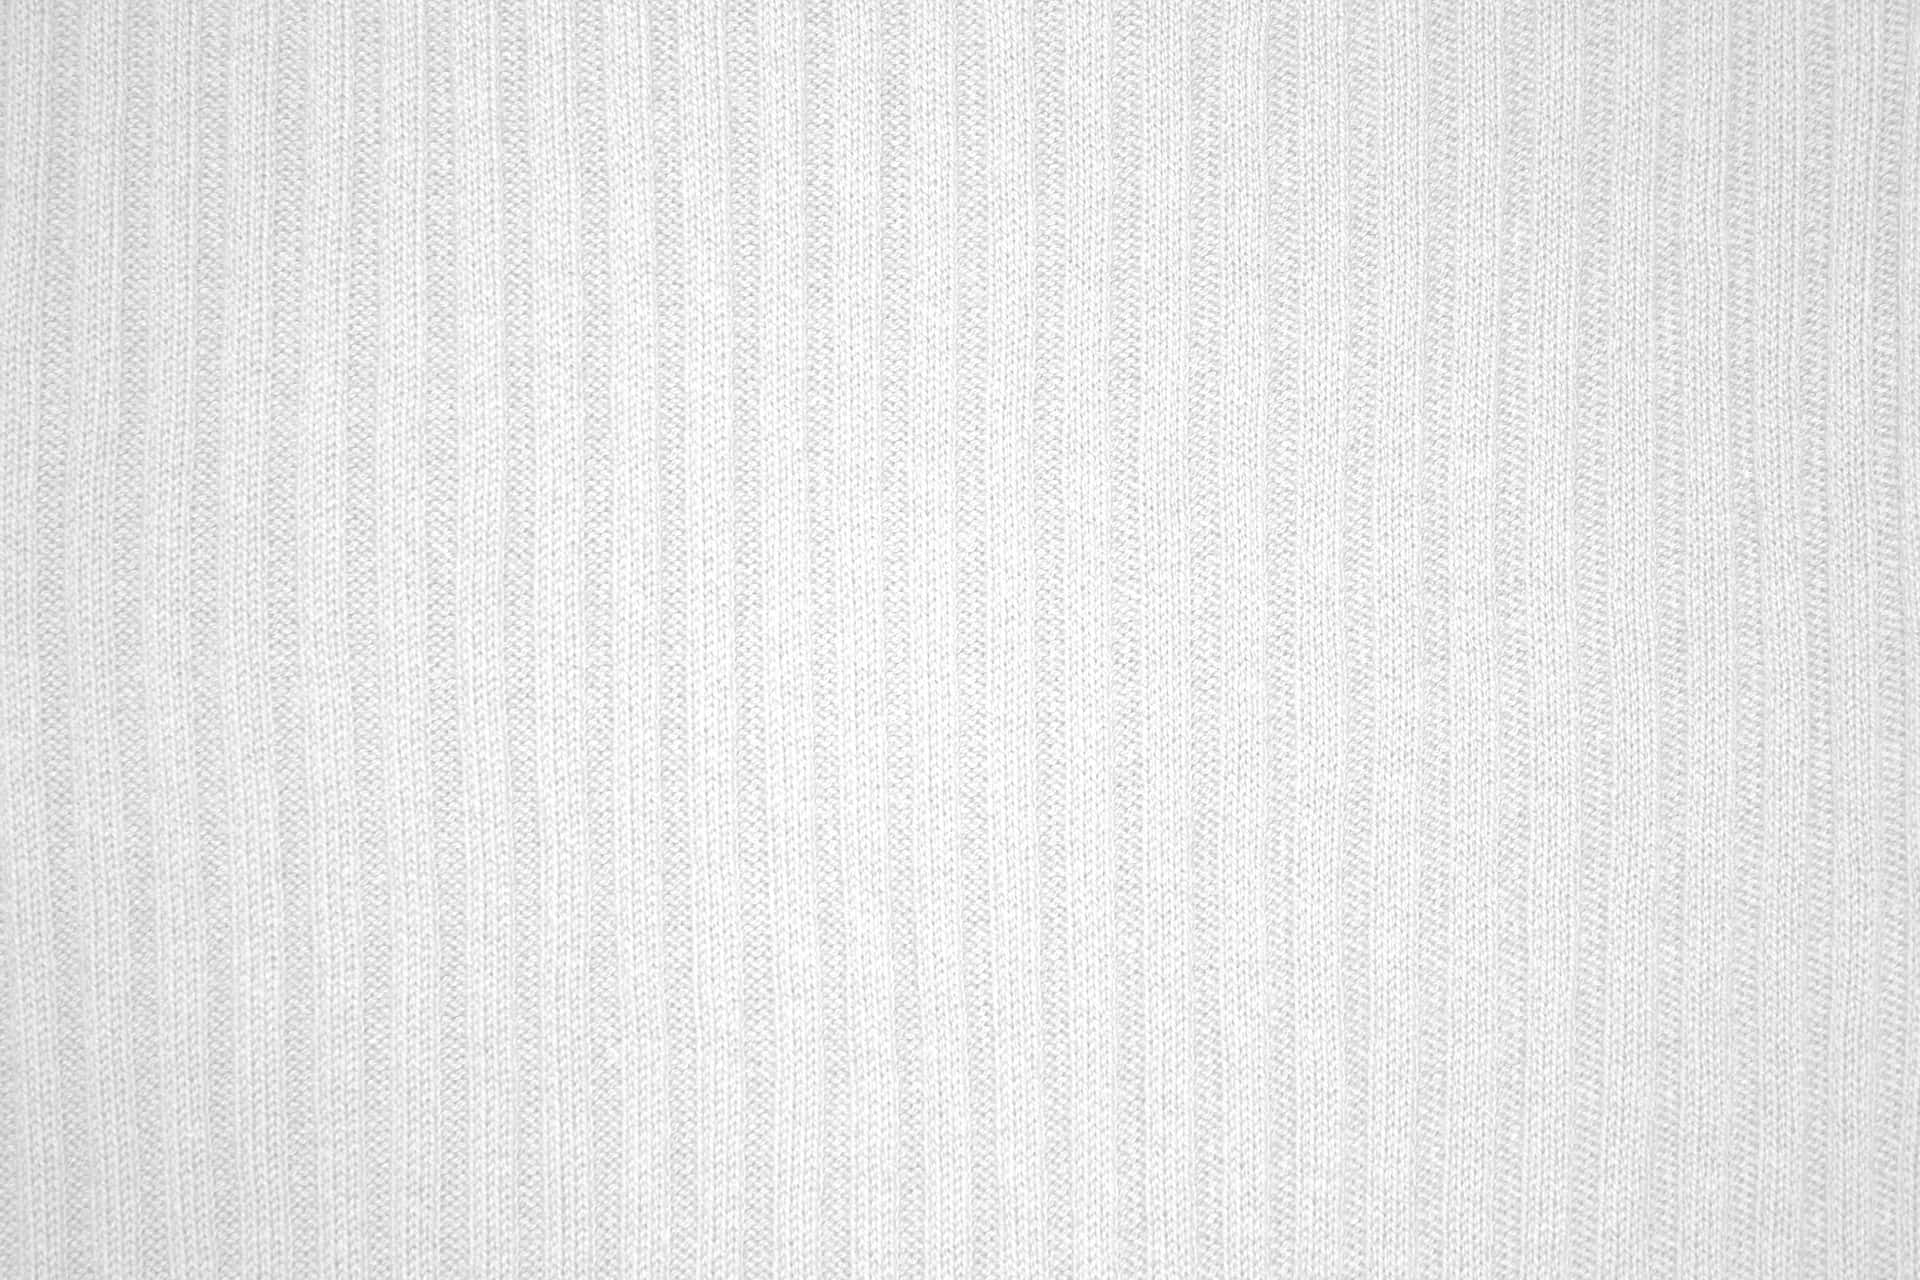 Wool Sweater White Texture Pictures